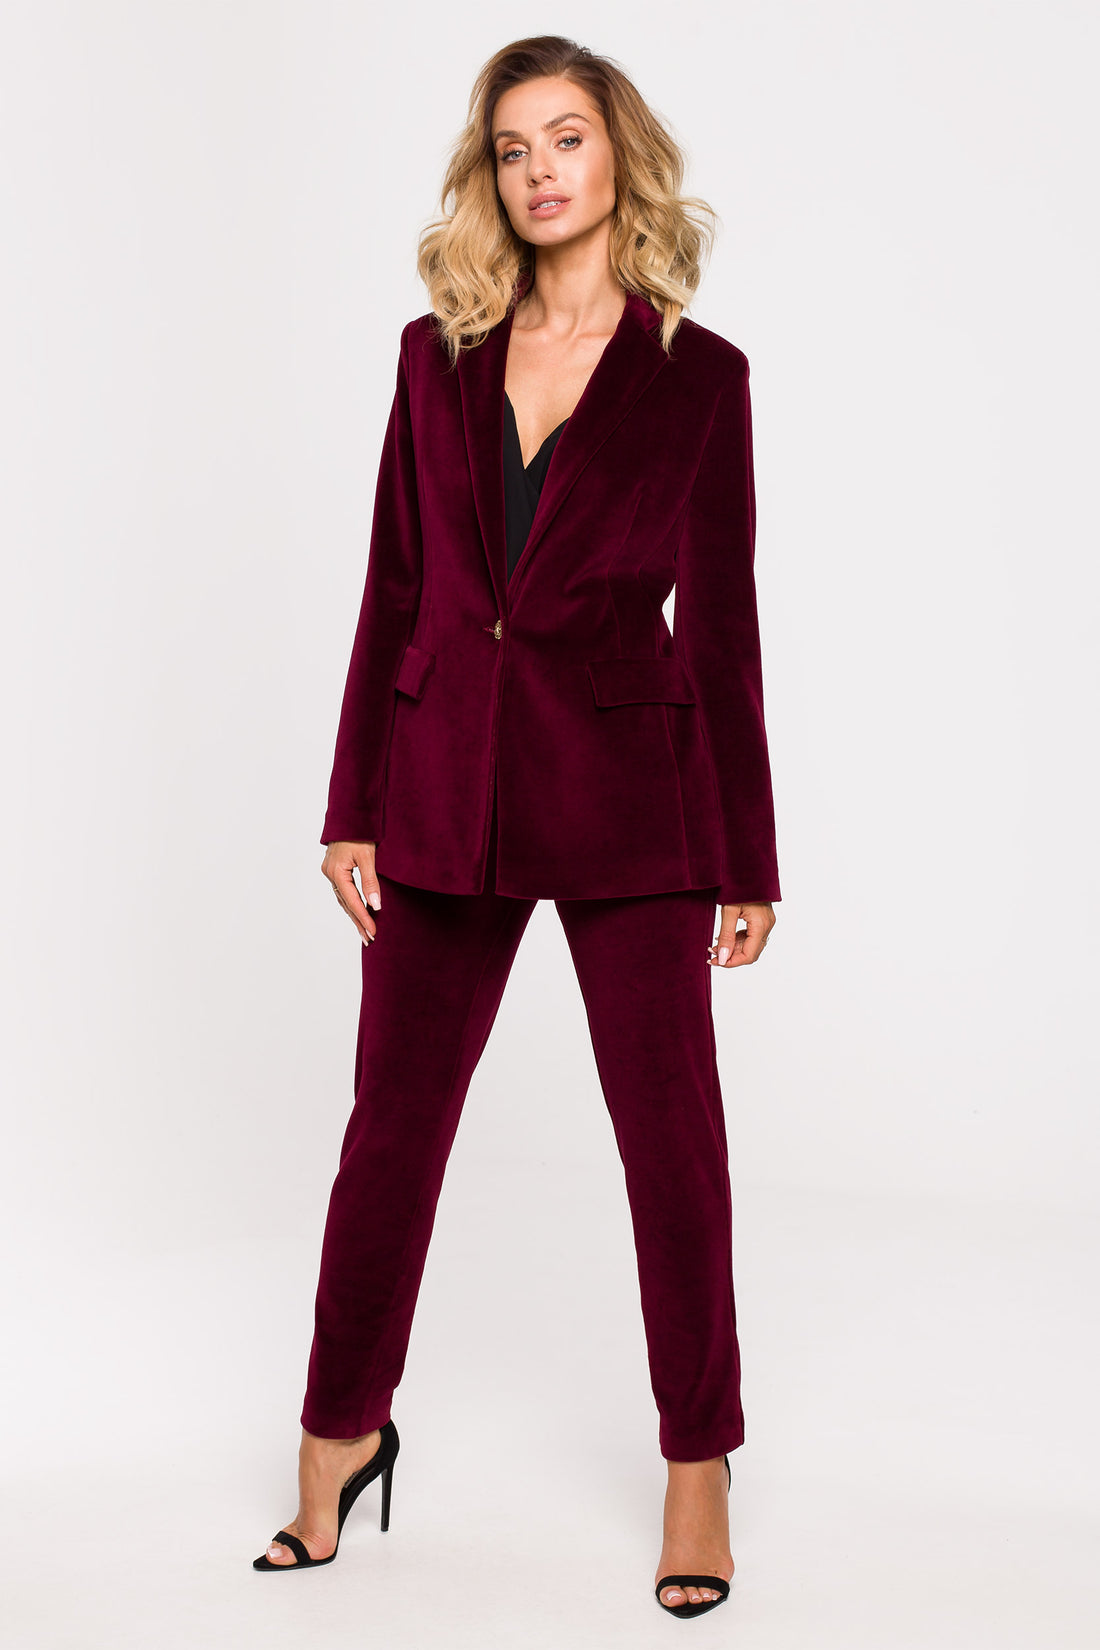 Wine Red Velvet Trousers Suit Separate